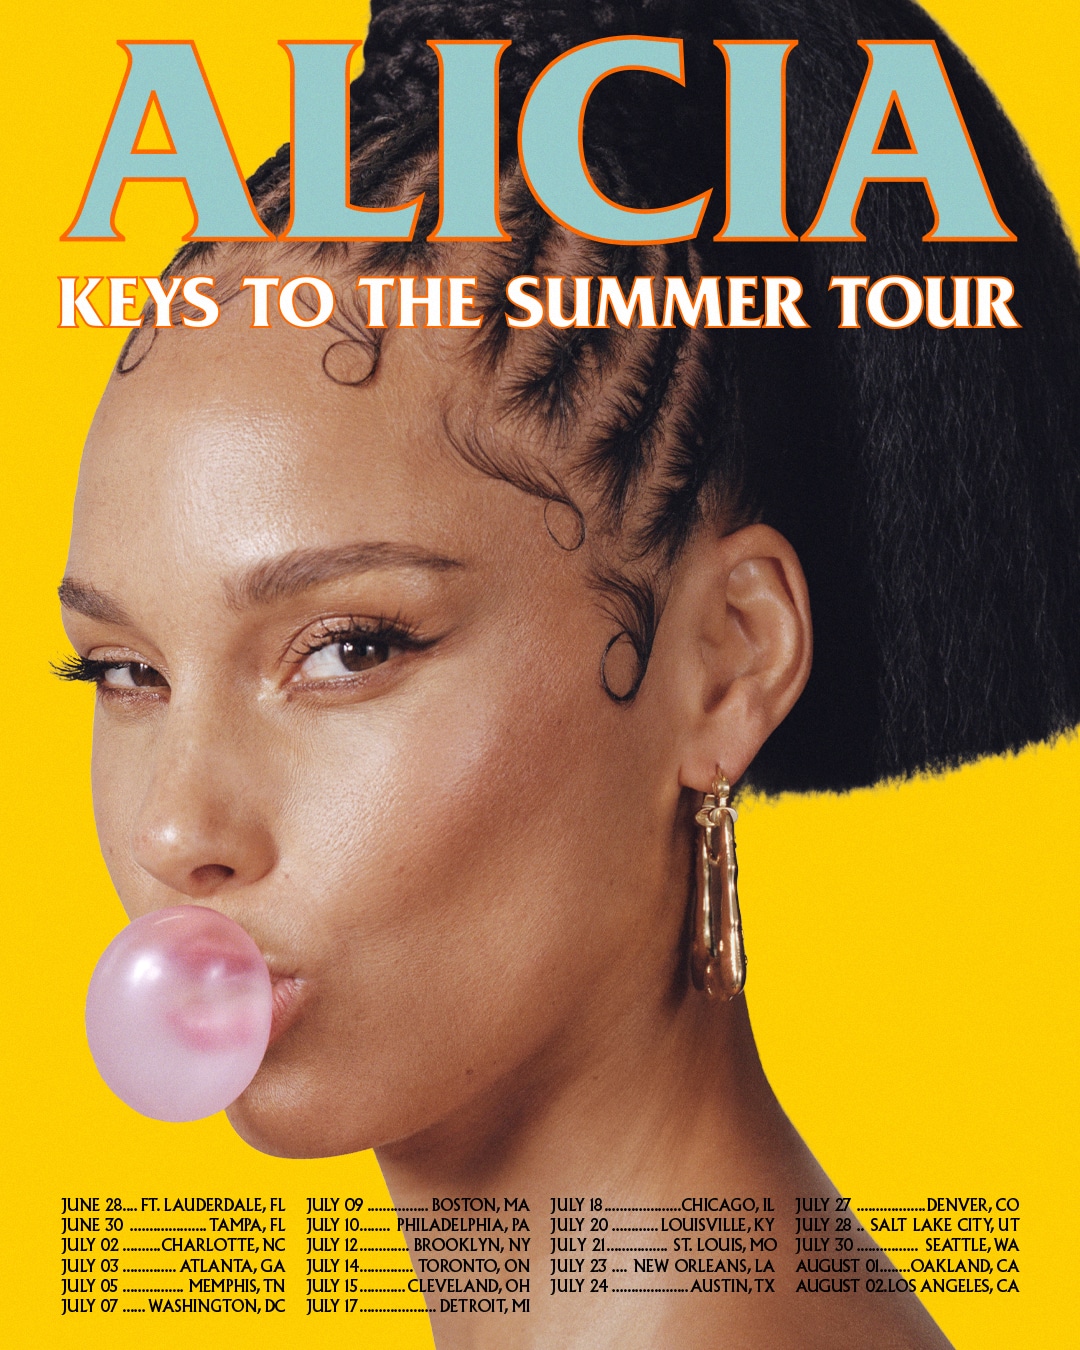 KEYS TO THE SUMMER TOUR